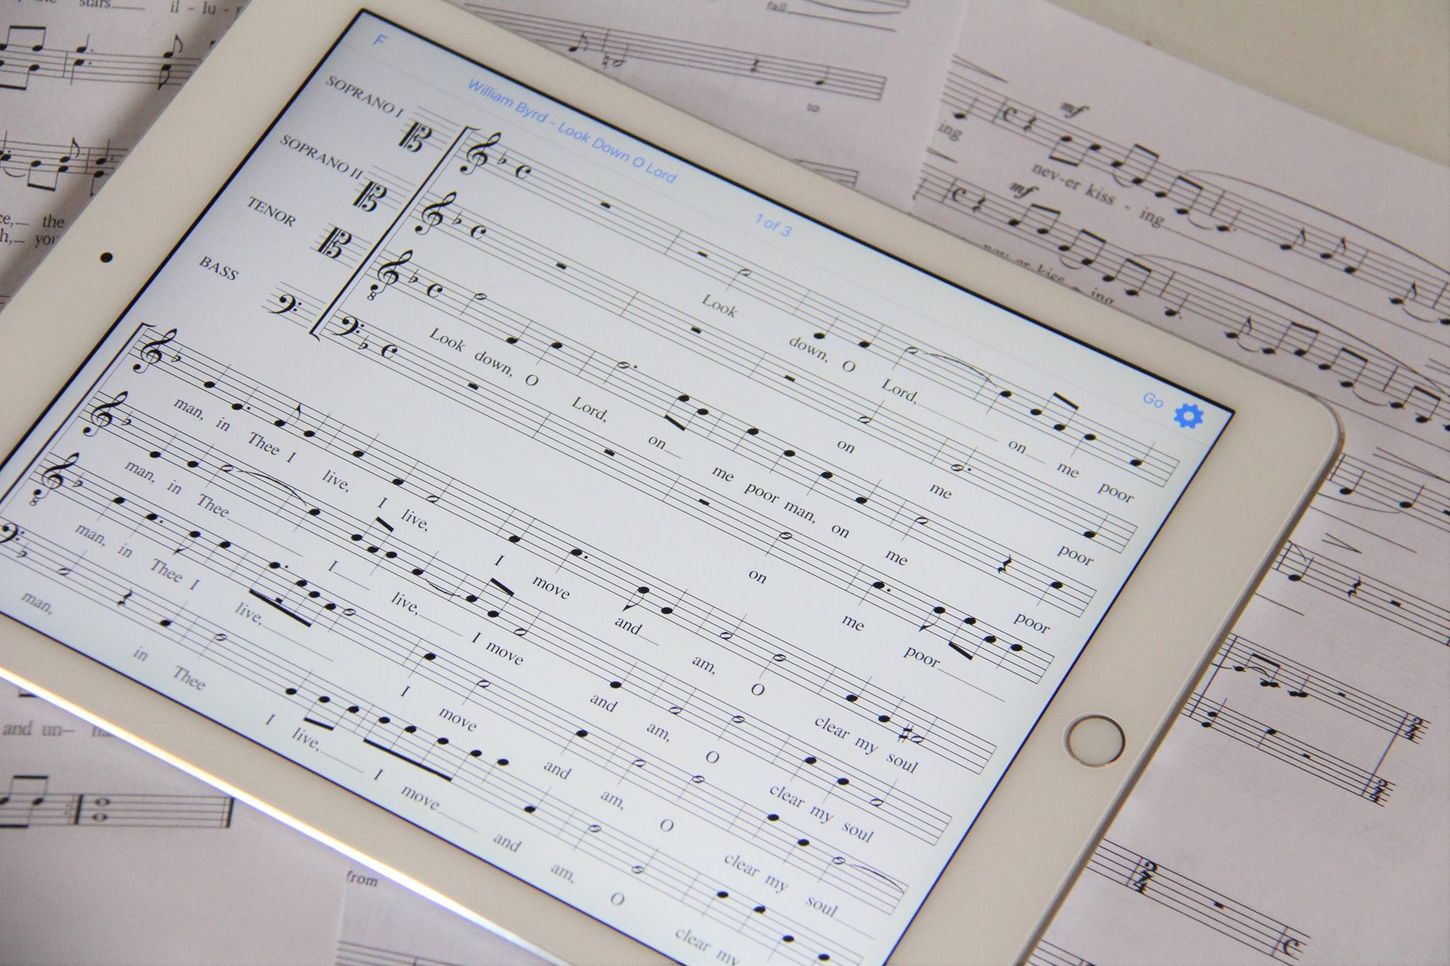 How To Transfer Sheet Music To Digital